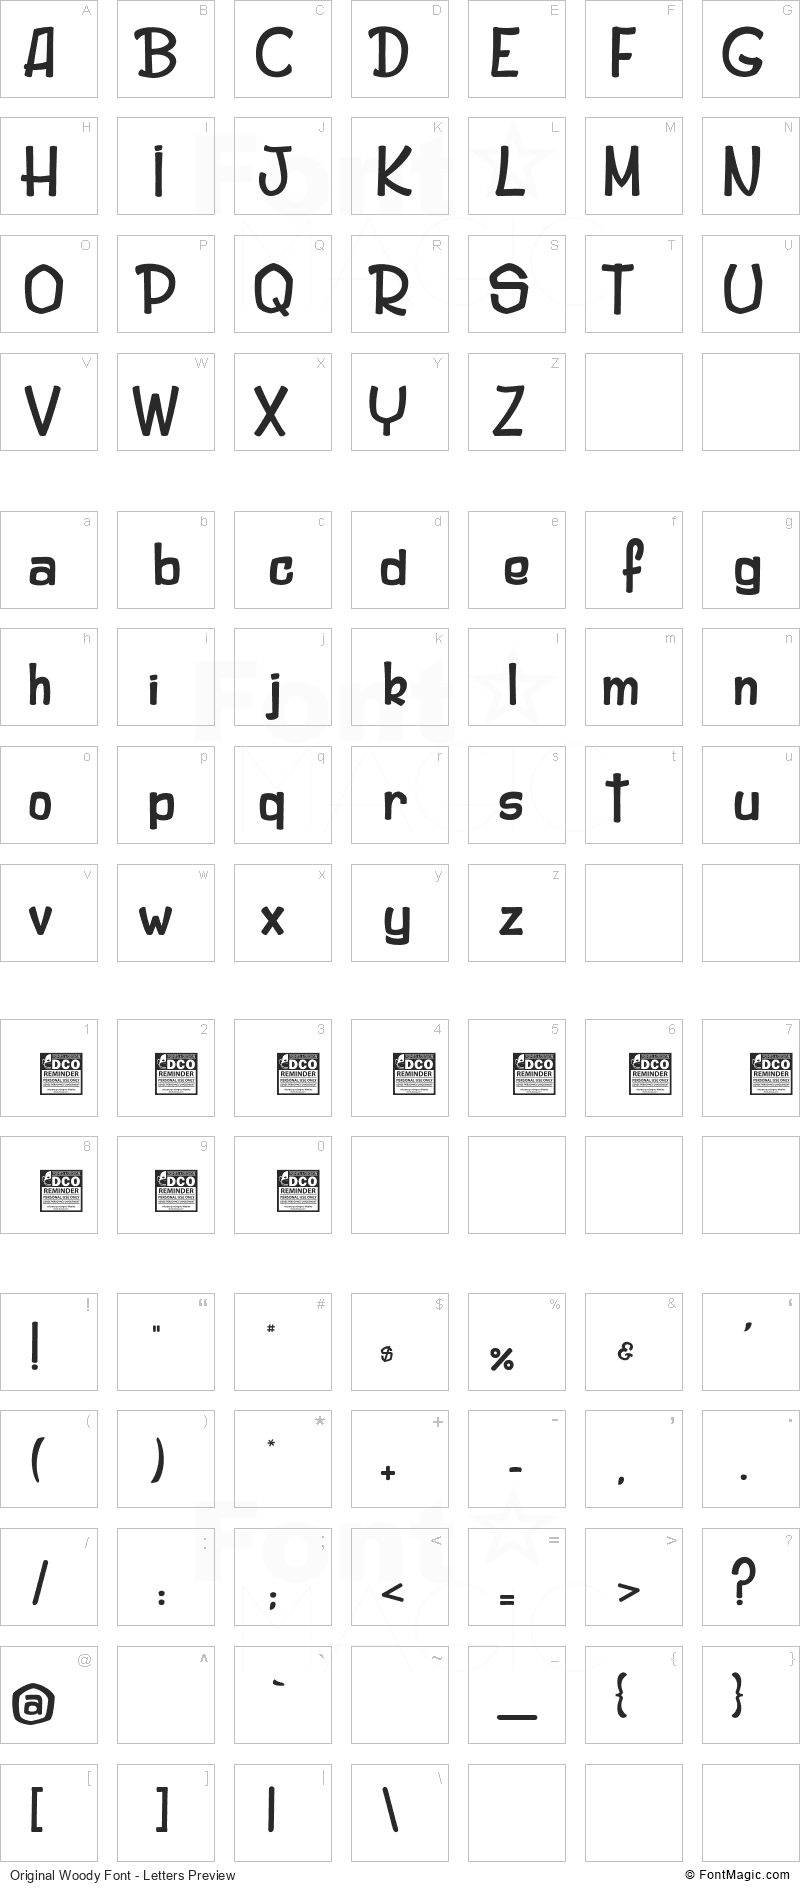 Original Woody Font - All Latters Preview Chart